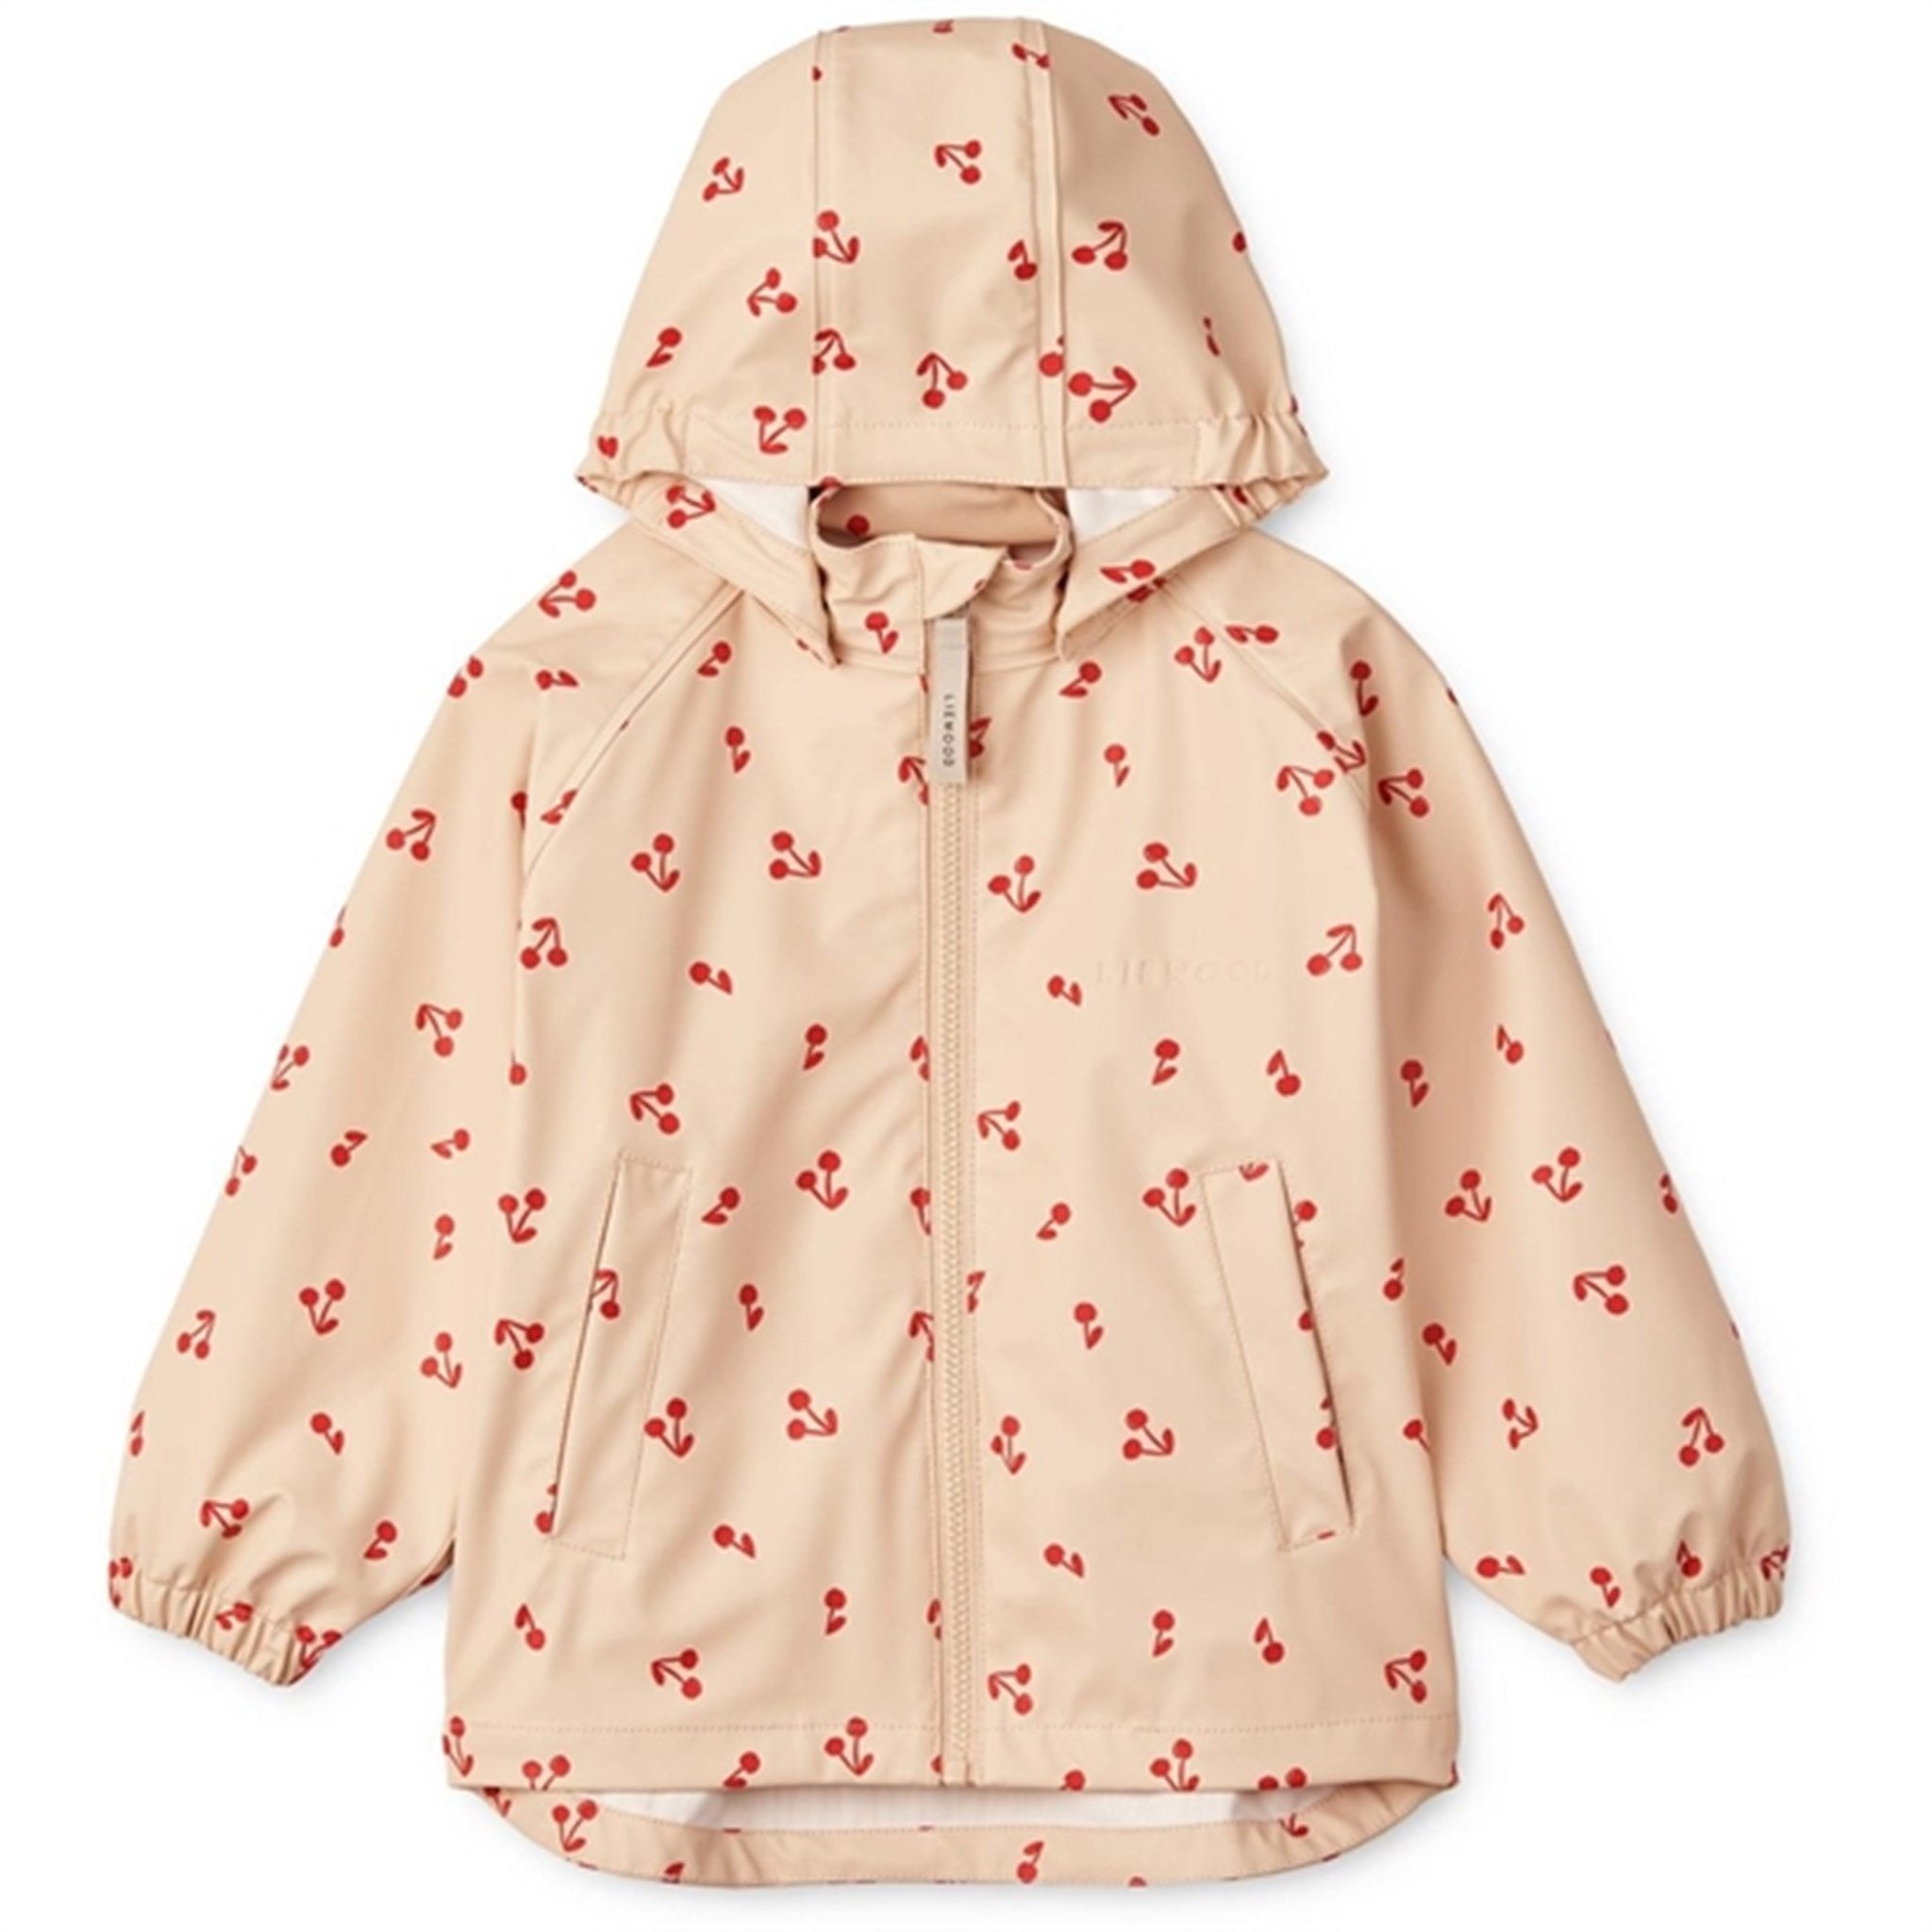 Liewood Cherries/Apple Blossom Moby Jacket